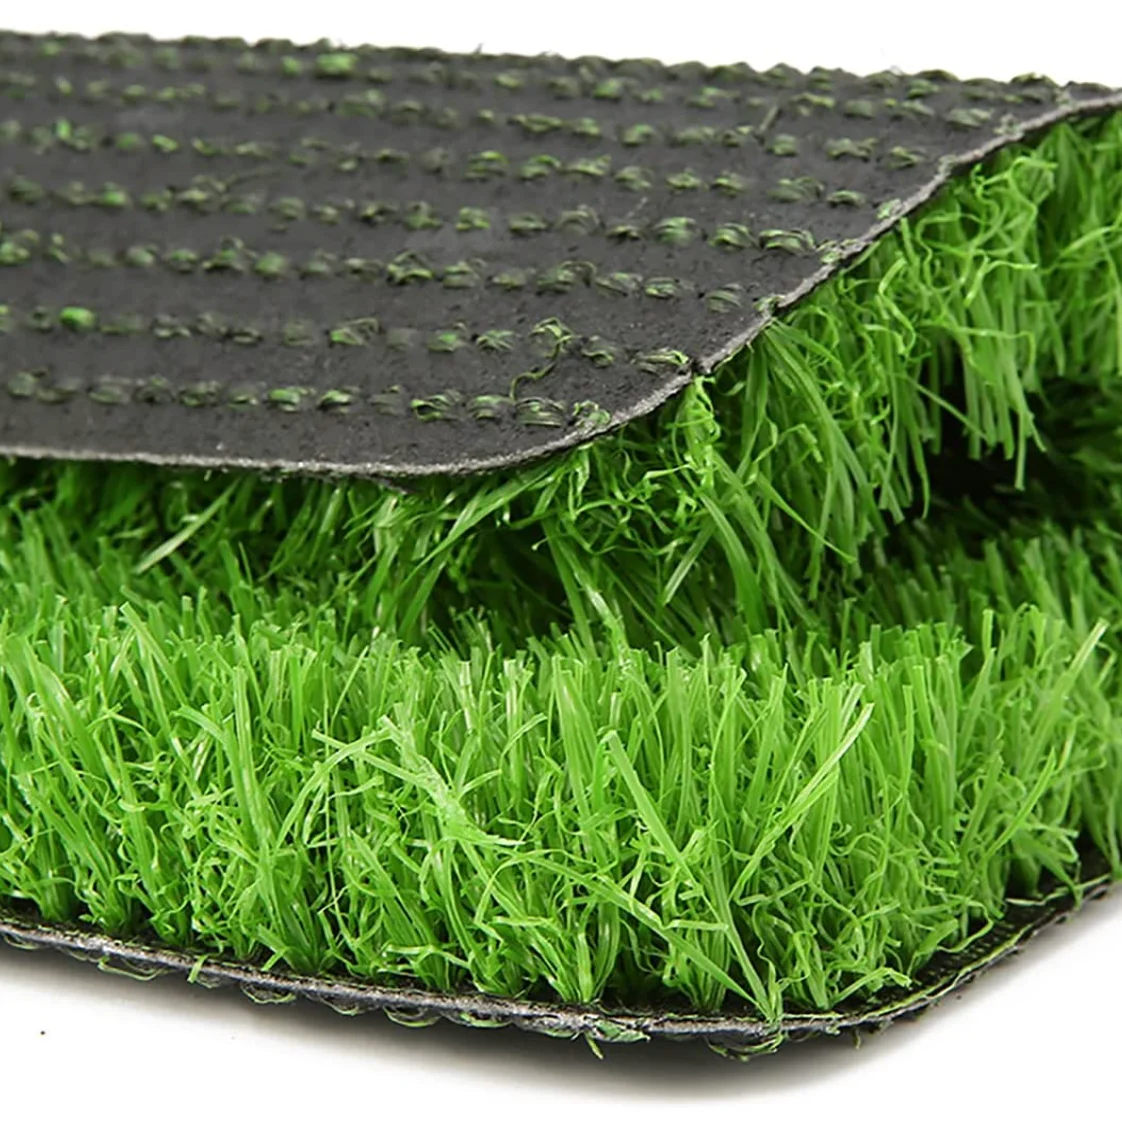 Factory Provides Artificial Grass Dog Grass Mat Potty Training Rug and Replacement Artificial Grass Turf (1600685044530)